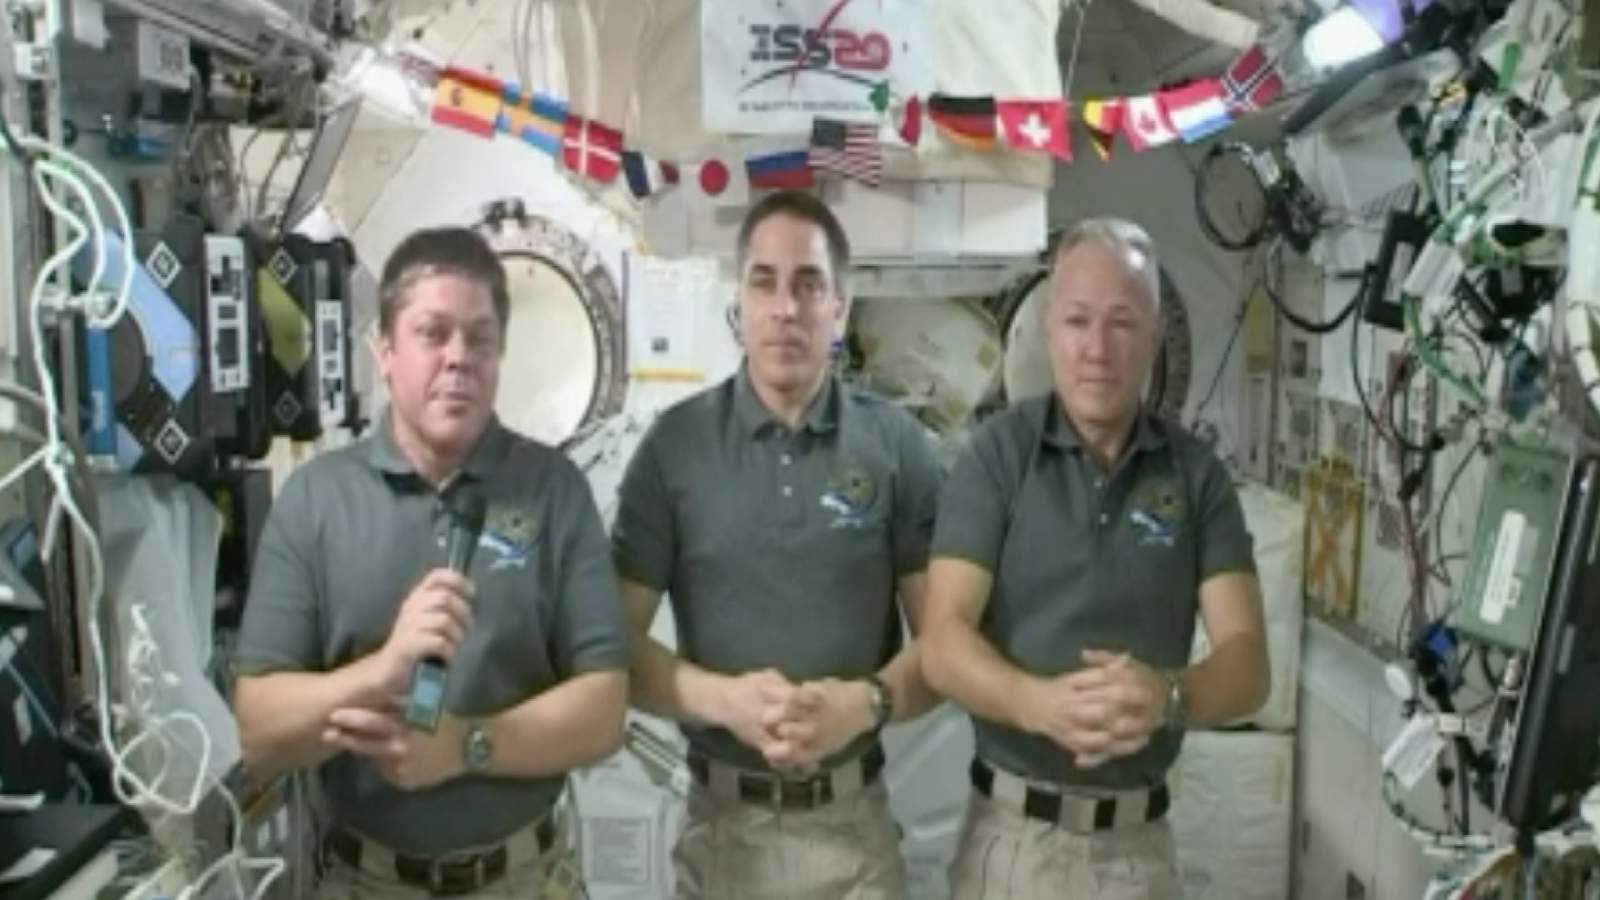 Demo-2 Crew Bob Behnken, Doug Hurley give one-on-one interview from ISS ahead of August 2 splashdown